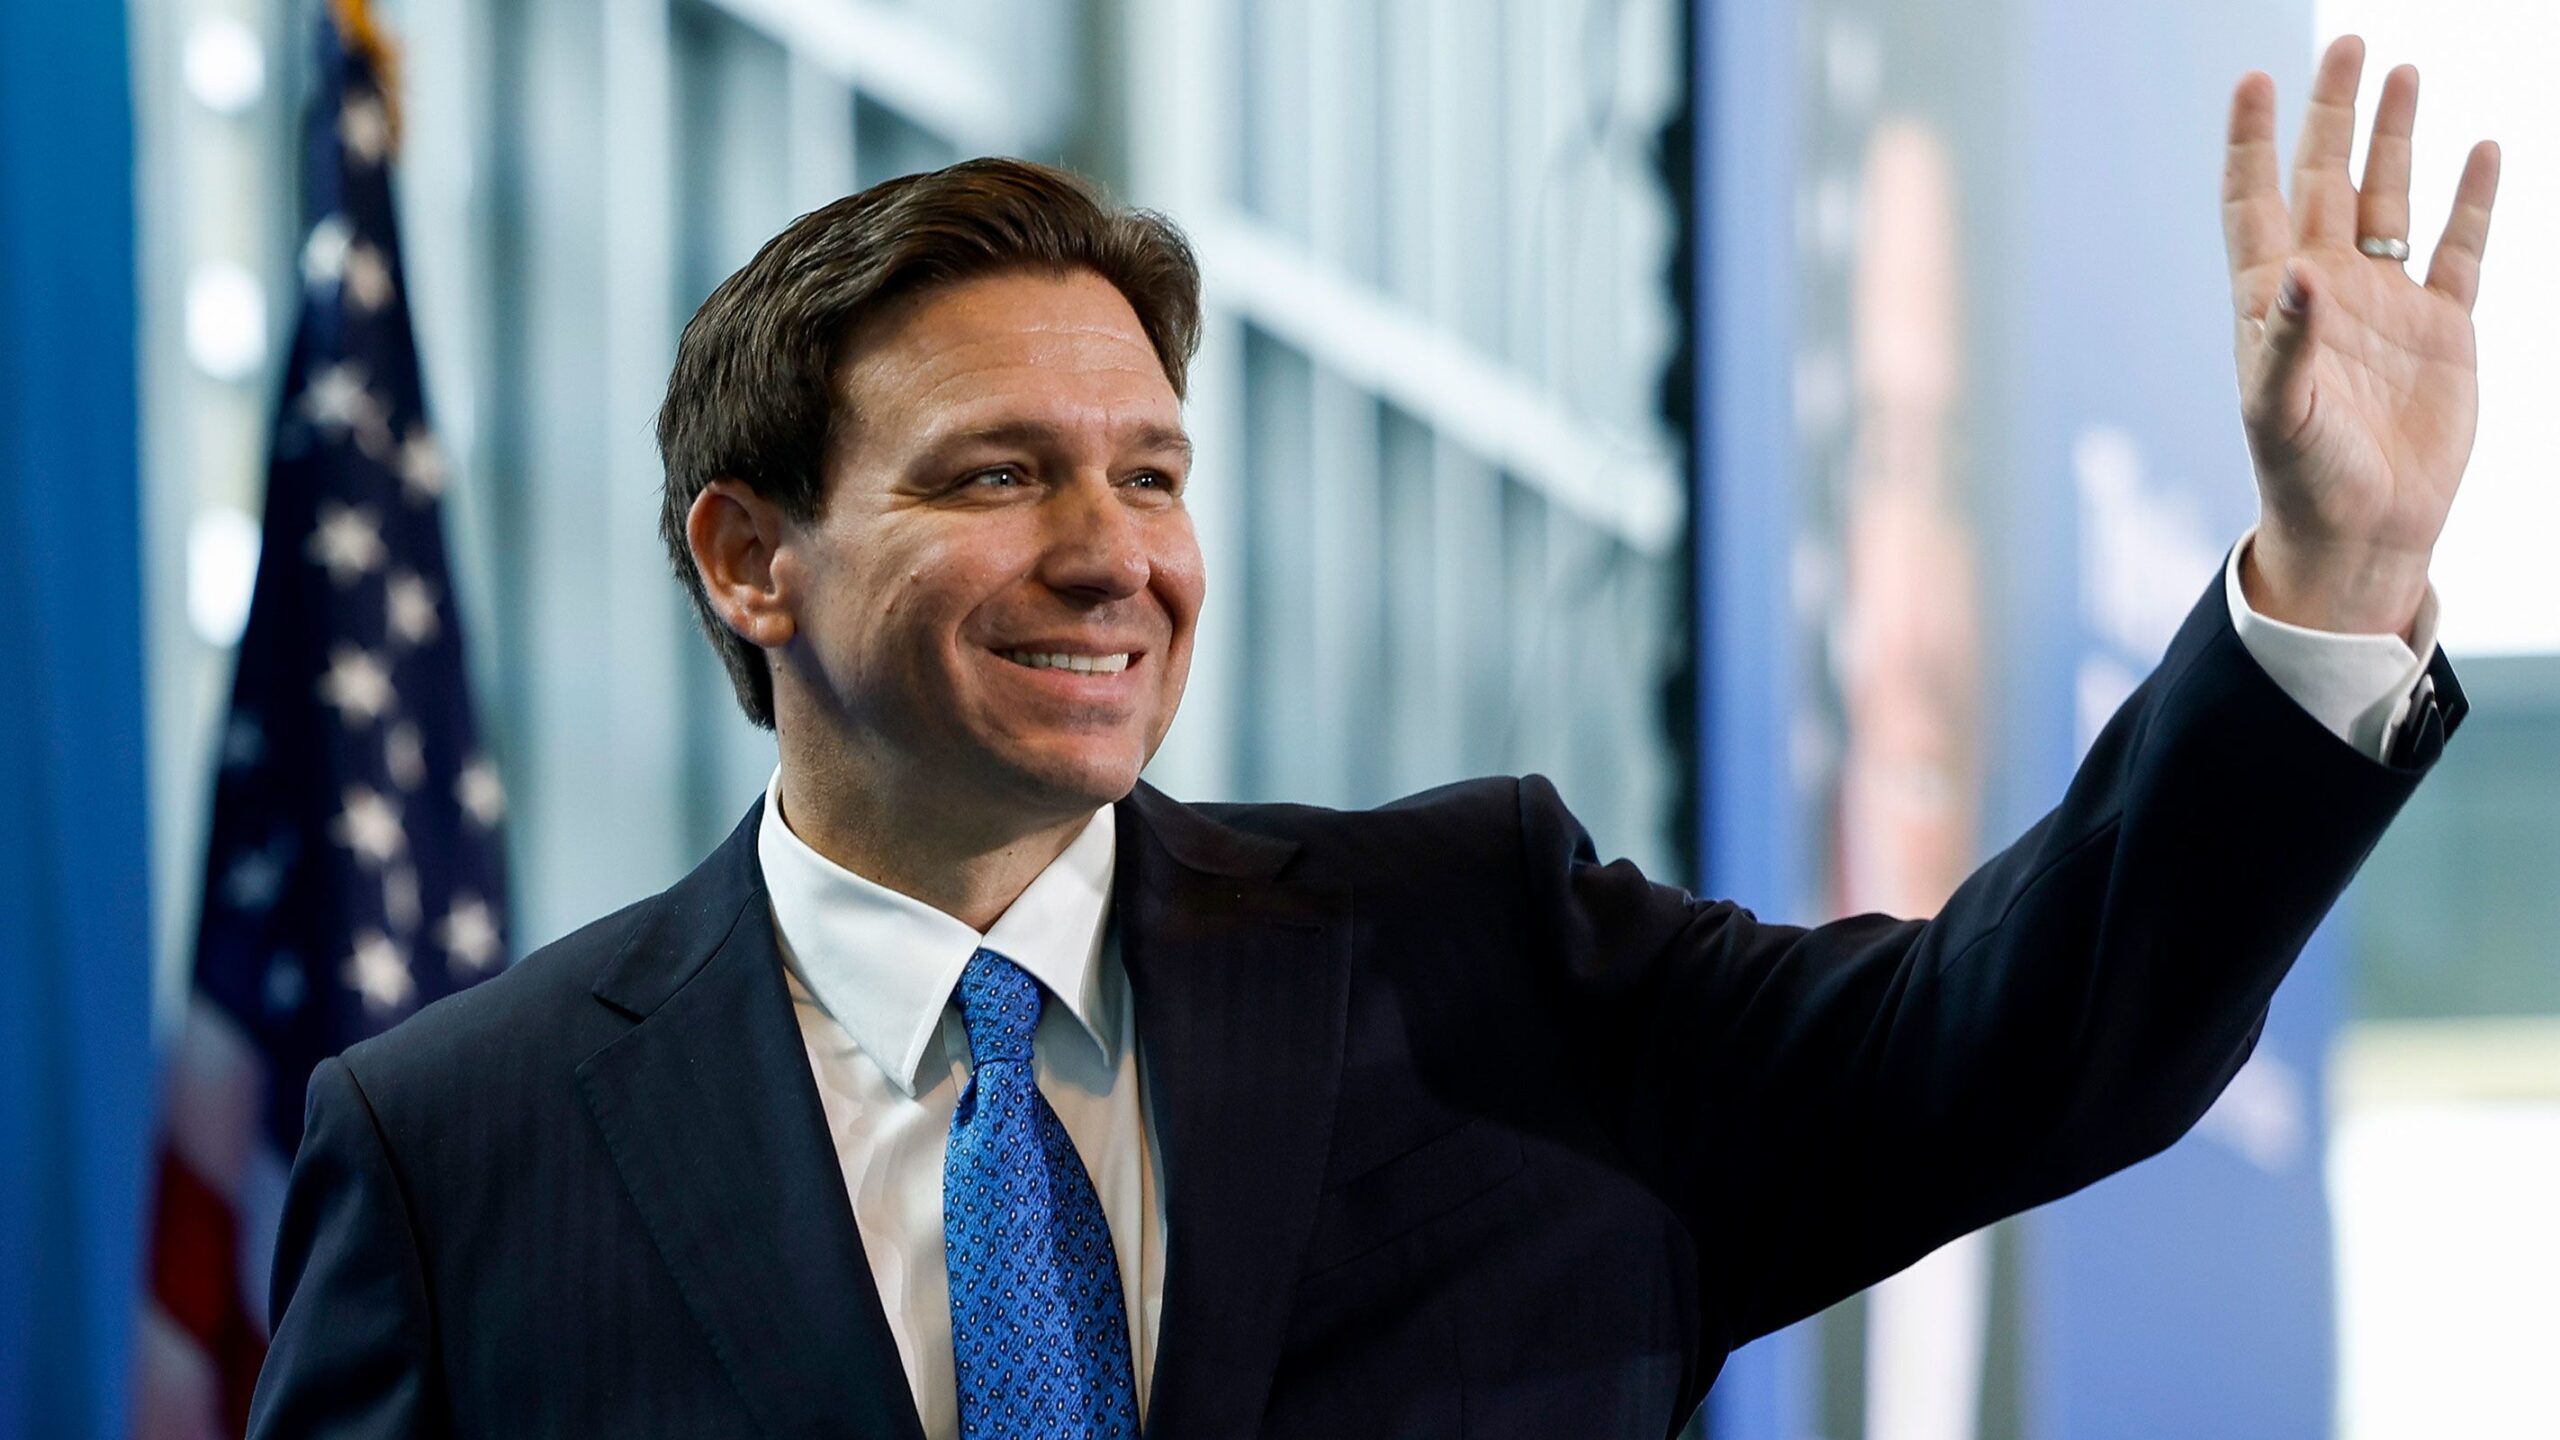 Florida Gov. Ron DeSantis will announce his 2024 presidential campaign Wednesday night in a convers...